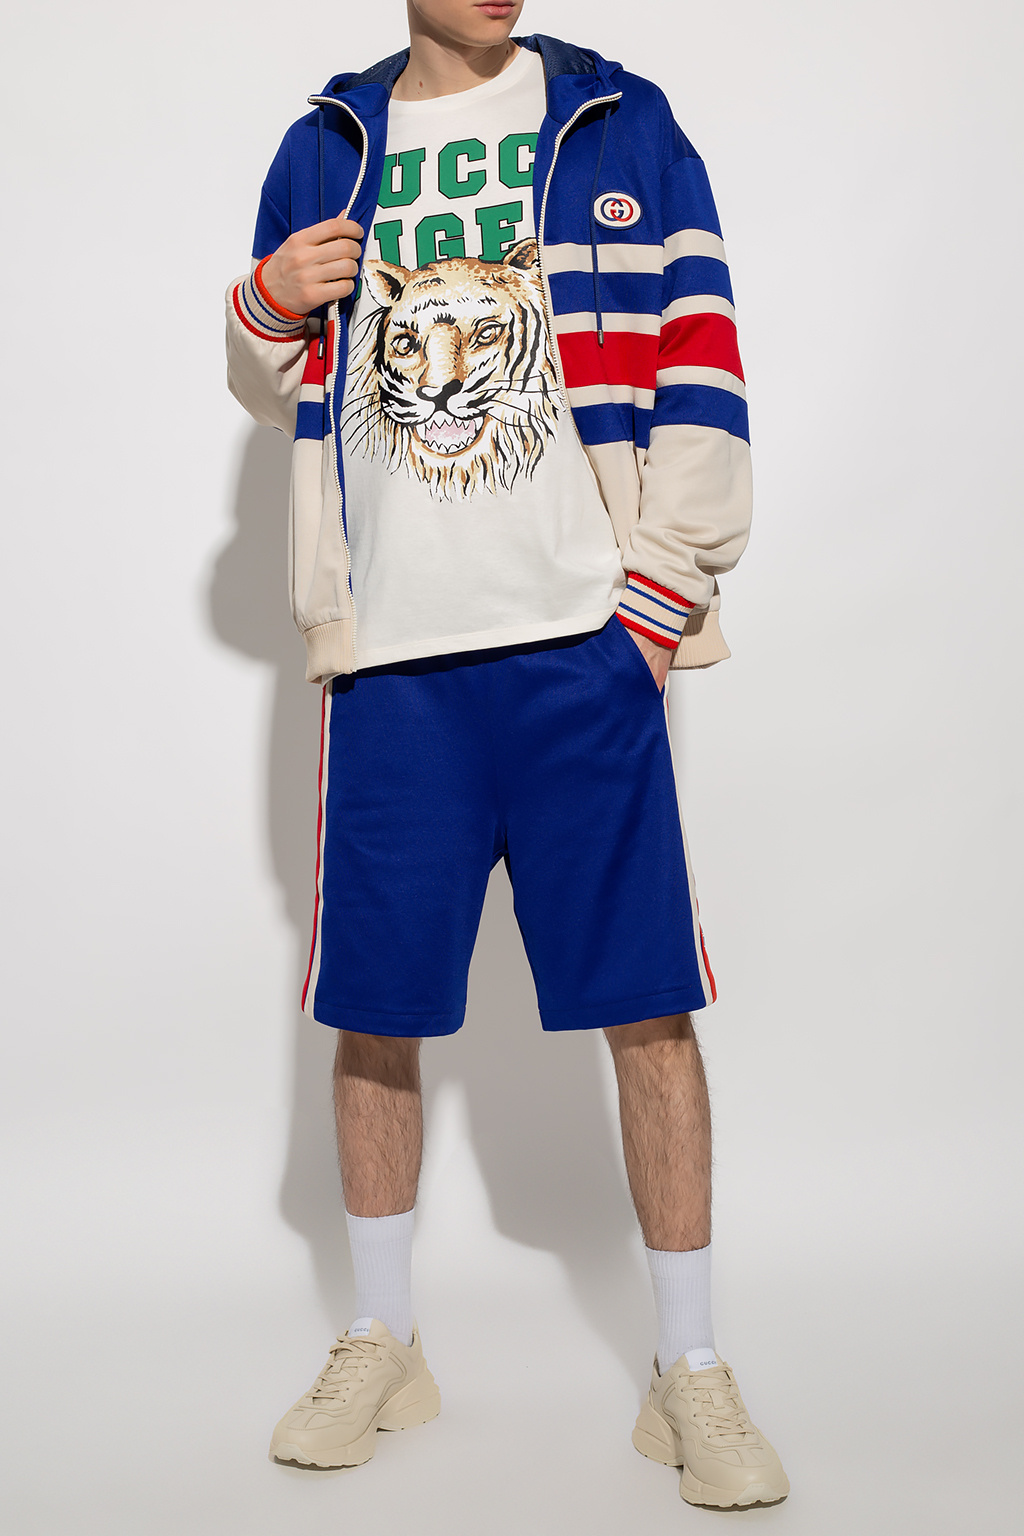 gucci Shades Hoodie from the ‘gucci Shades Tiger’ collection